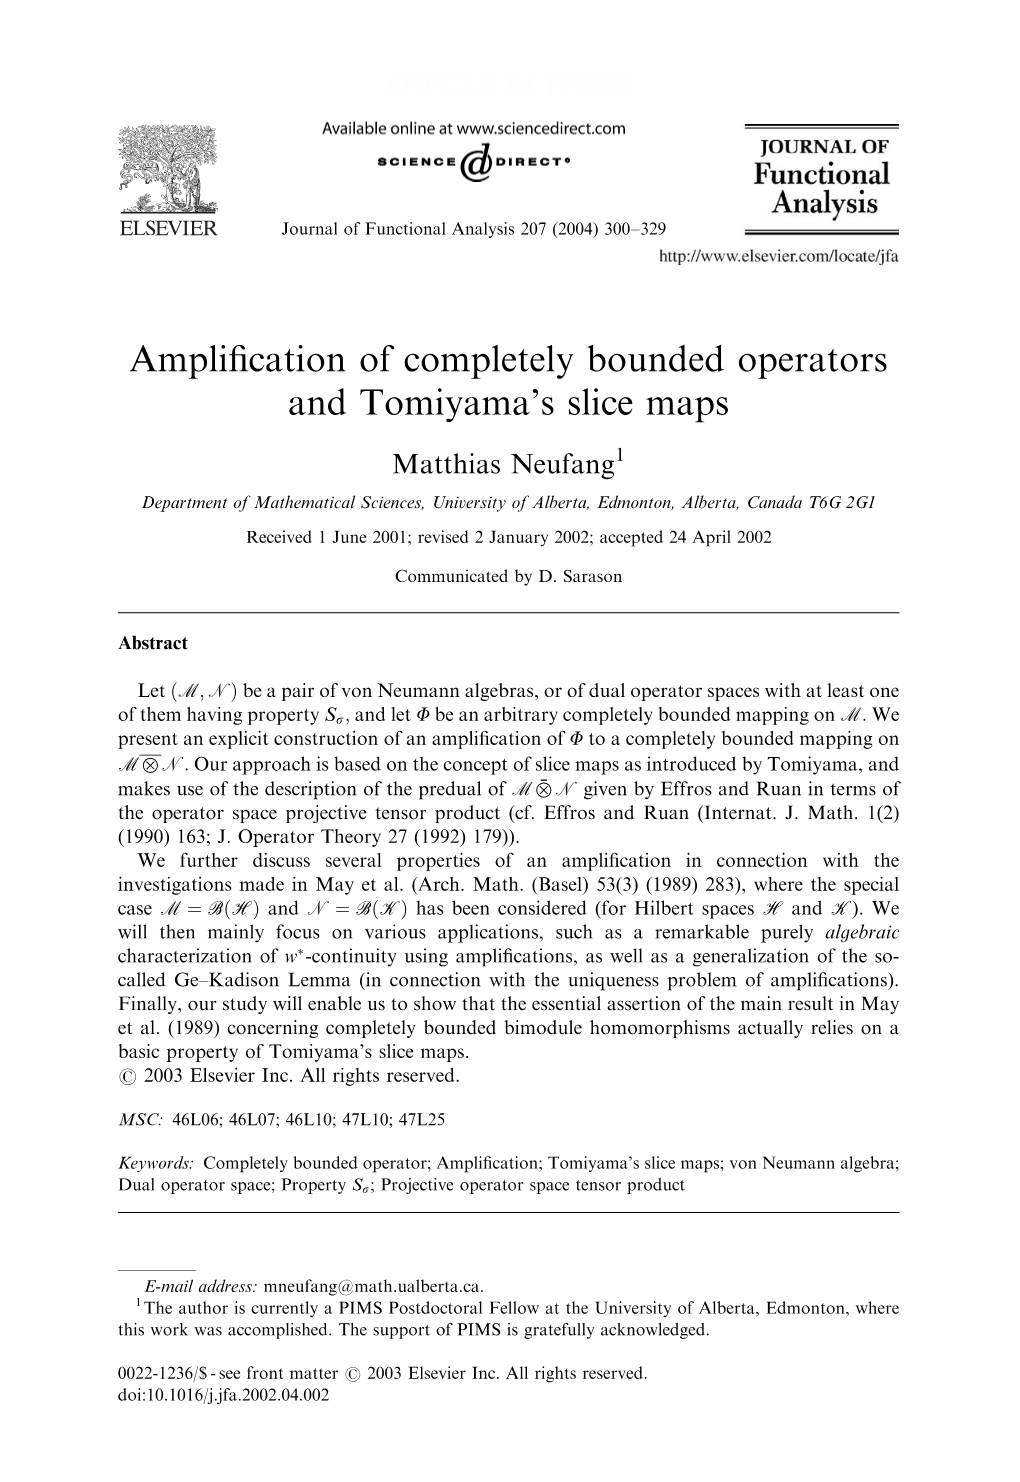 Amplification of Completely Bounded Operators and Tomiyama's Slice Maps